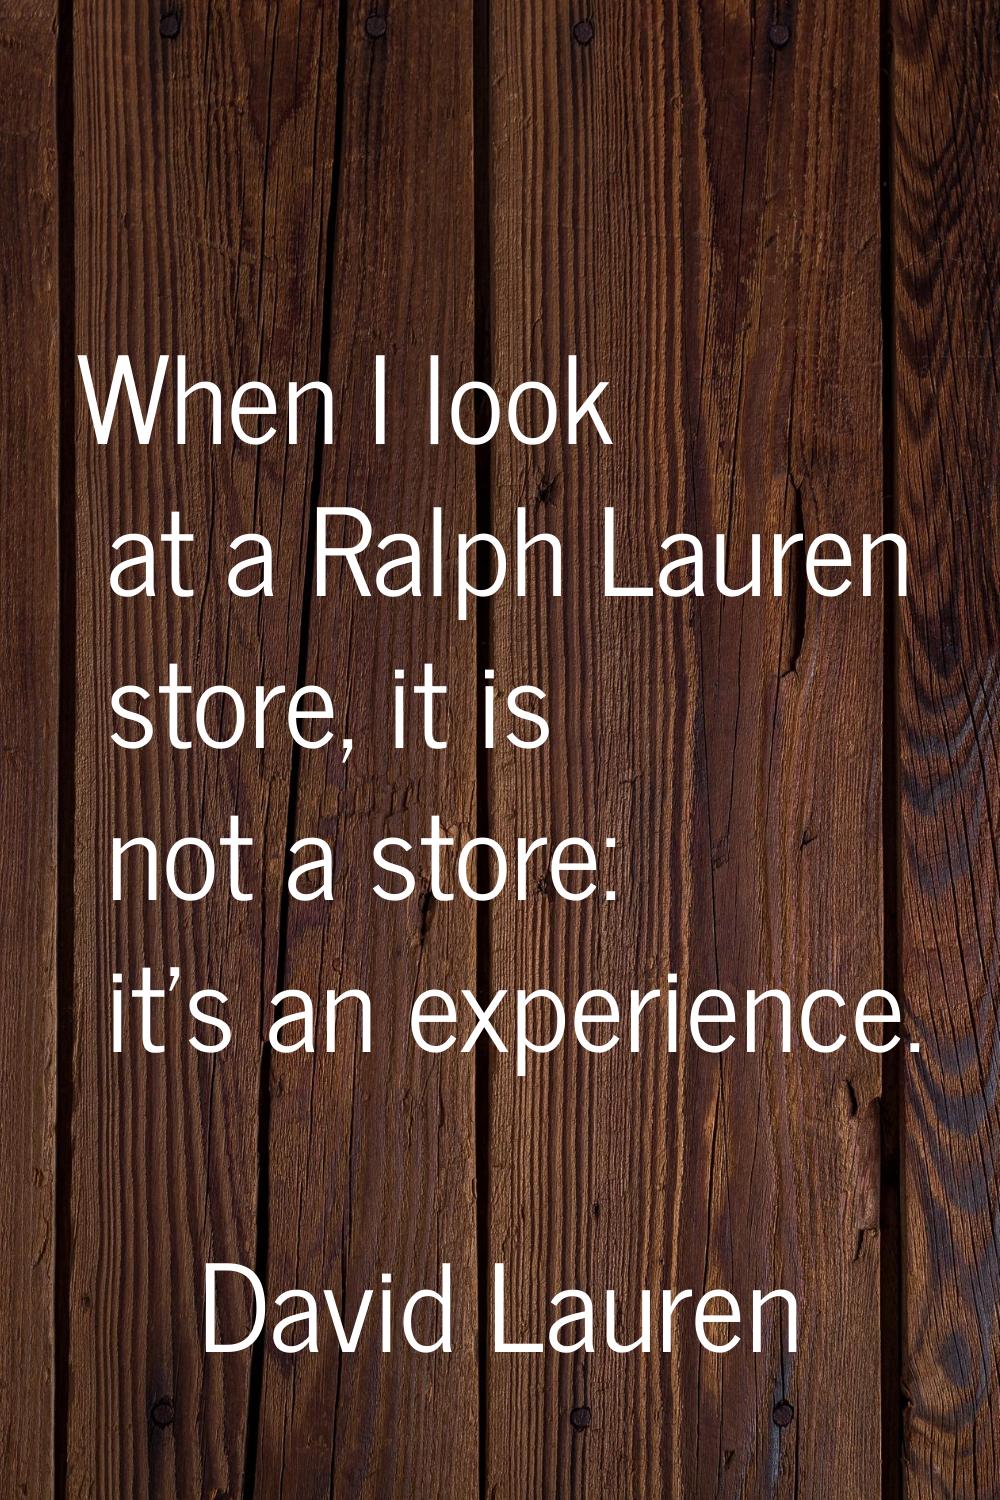 When I look at a Ralph Lauren store, it is not a store: it's an experience.